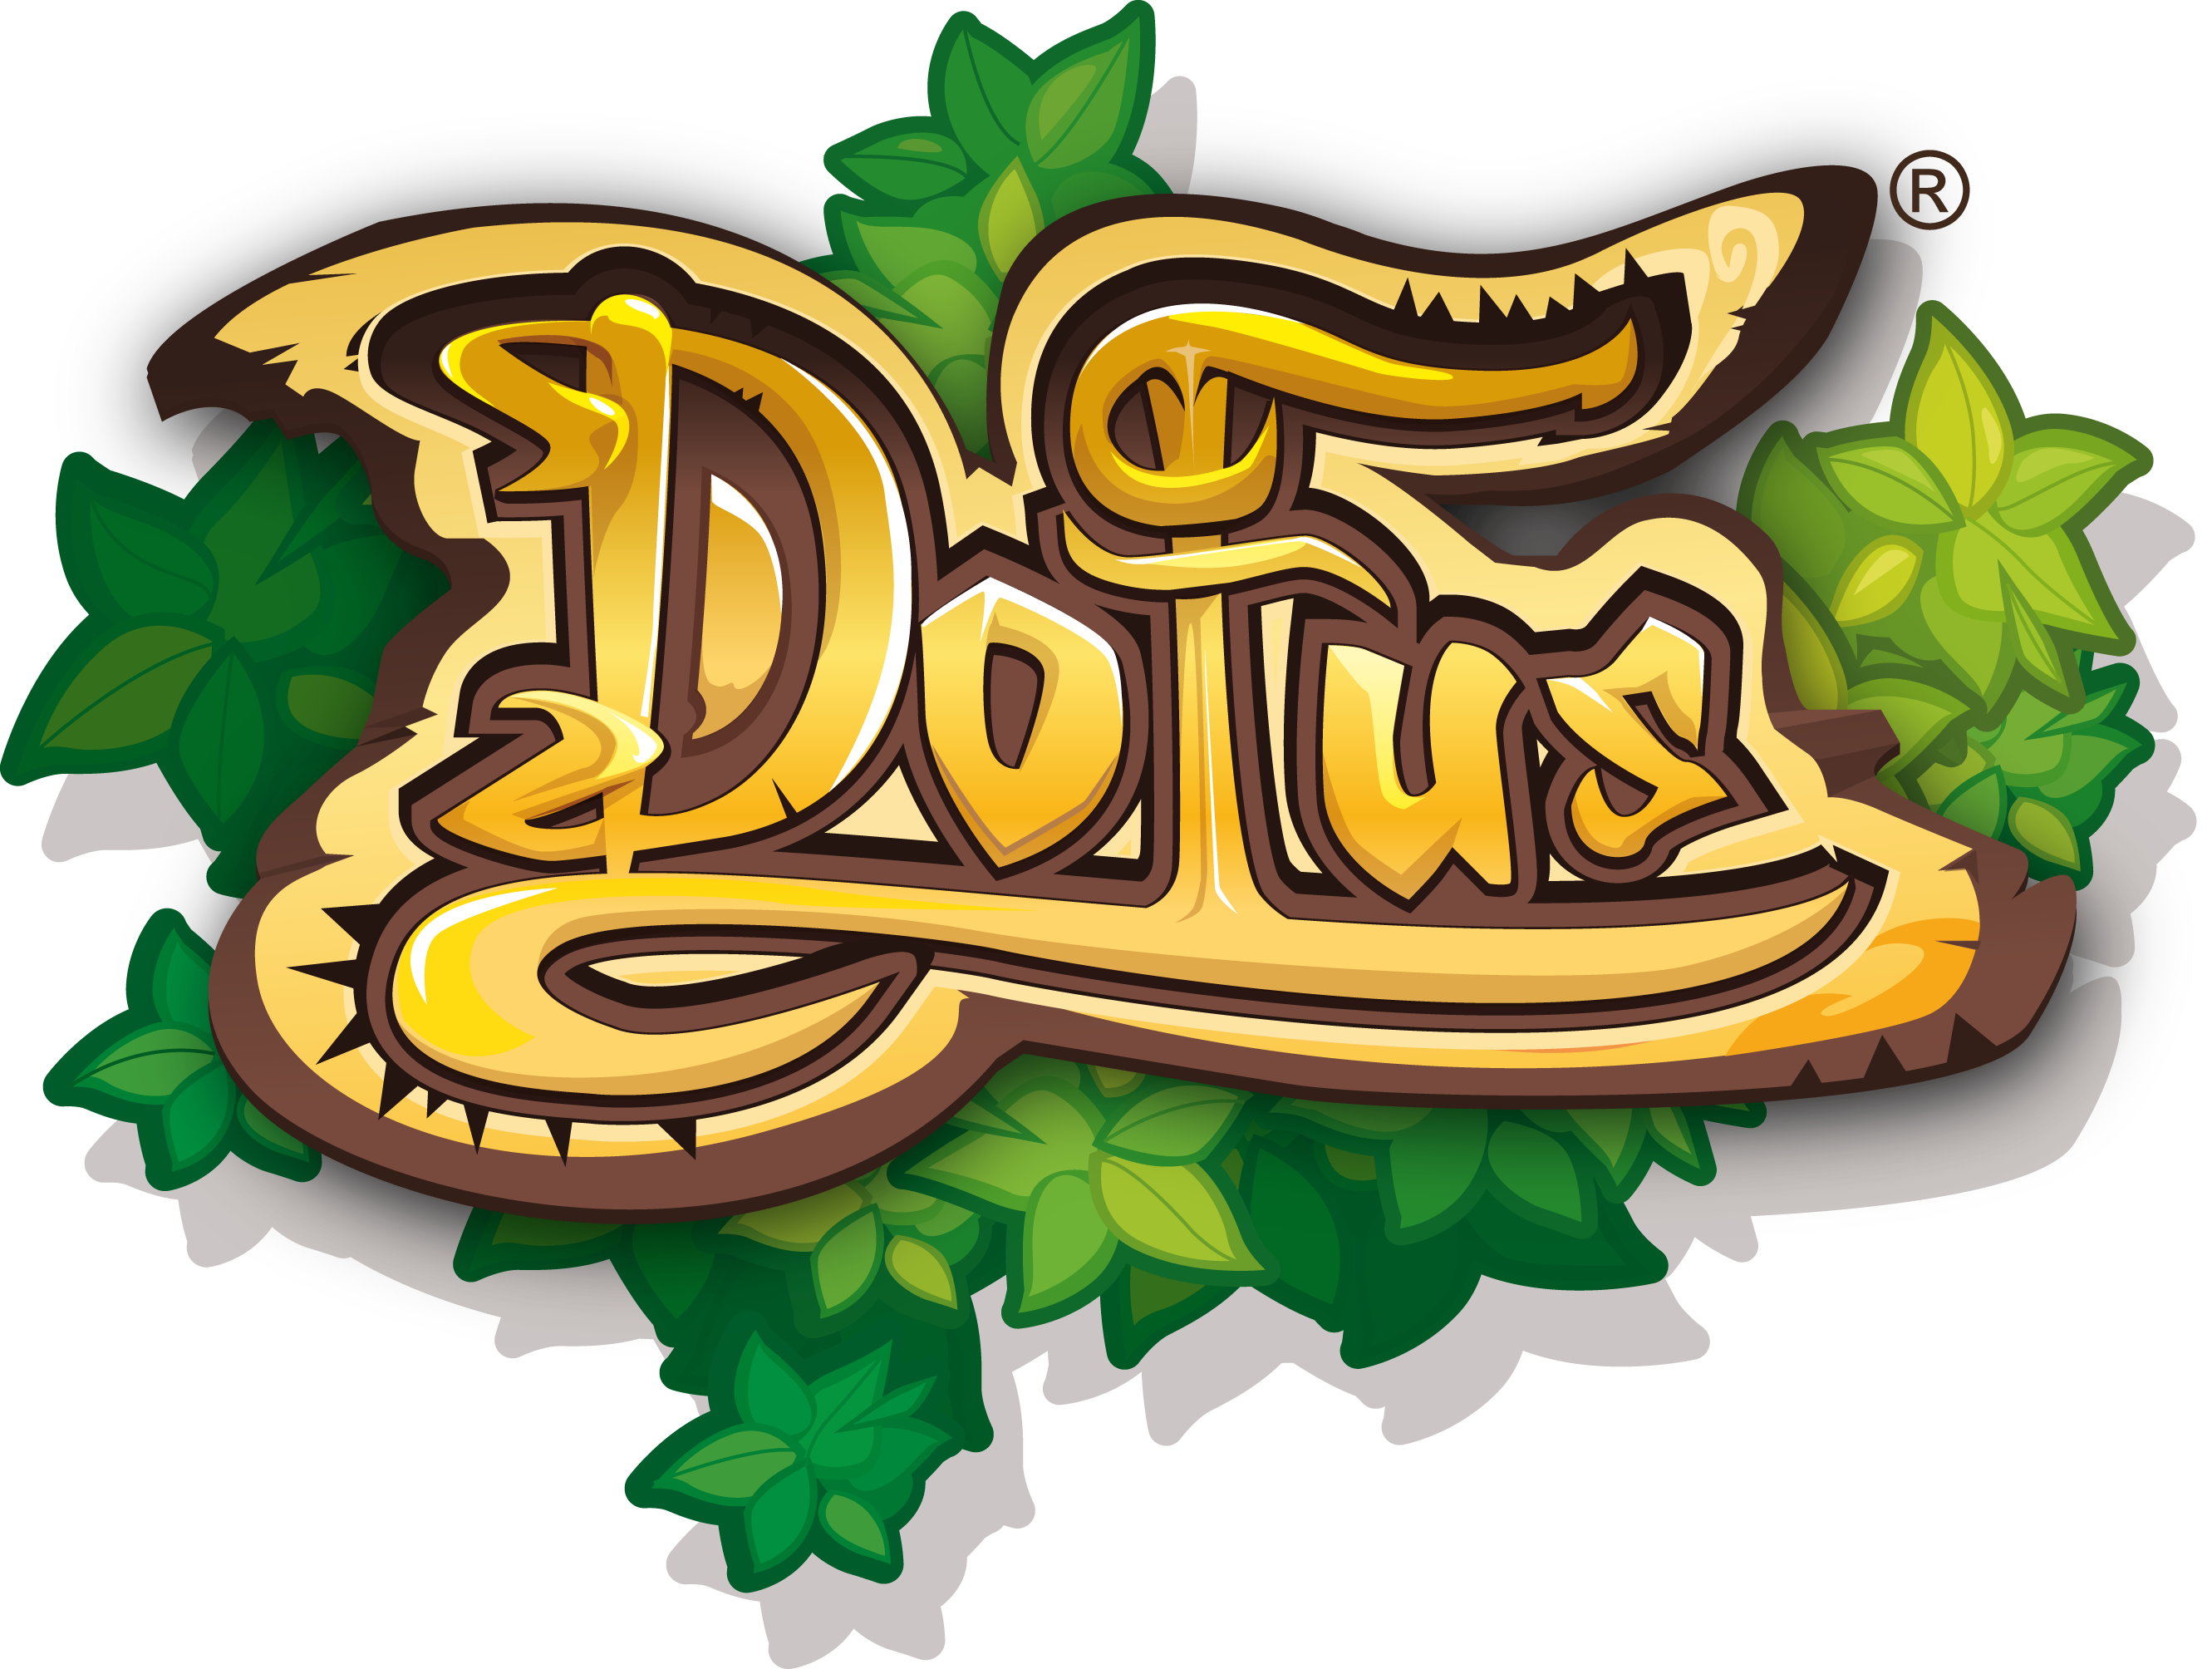 dofus touch leveling guide